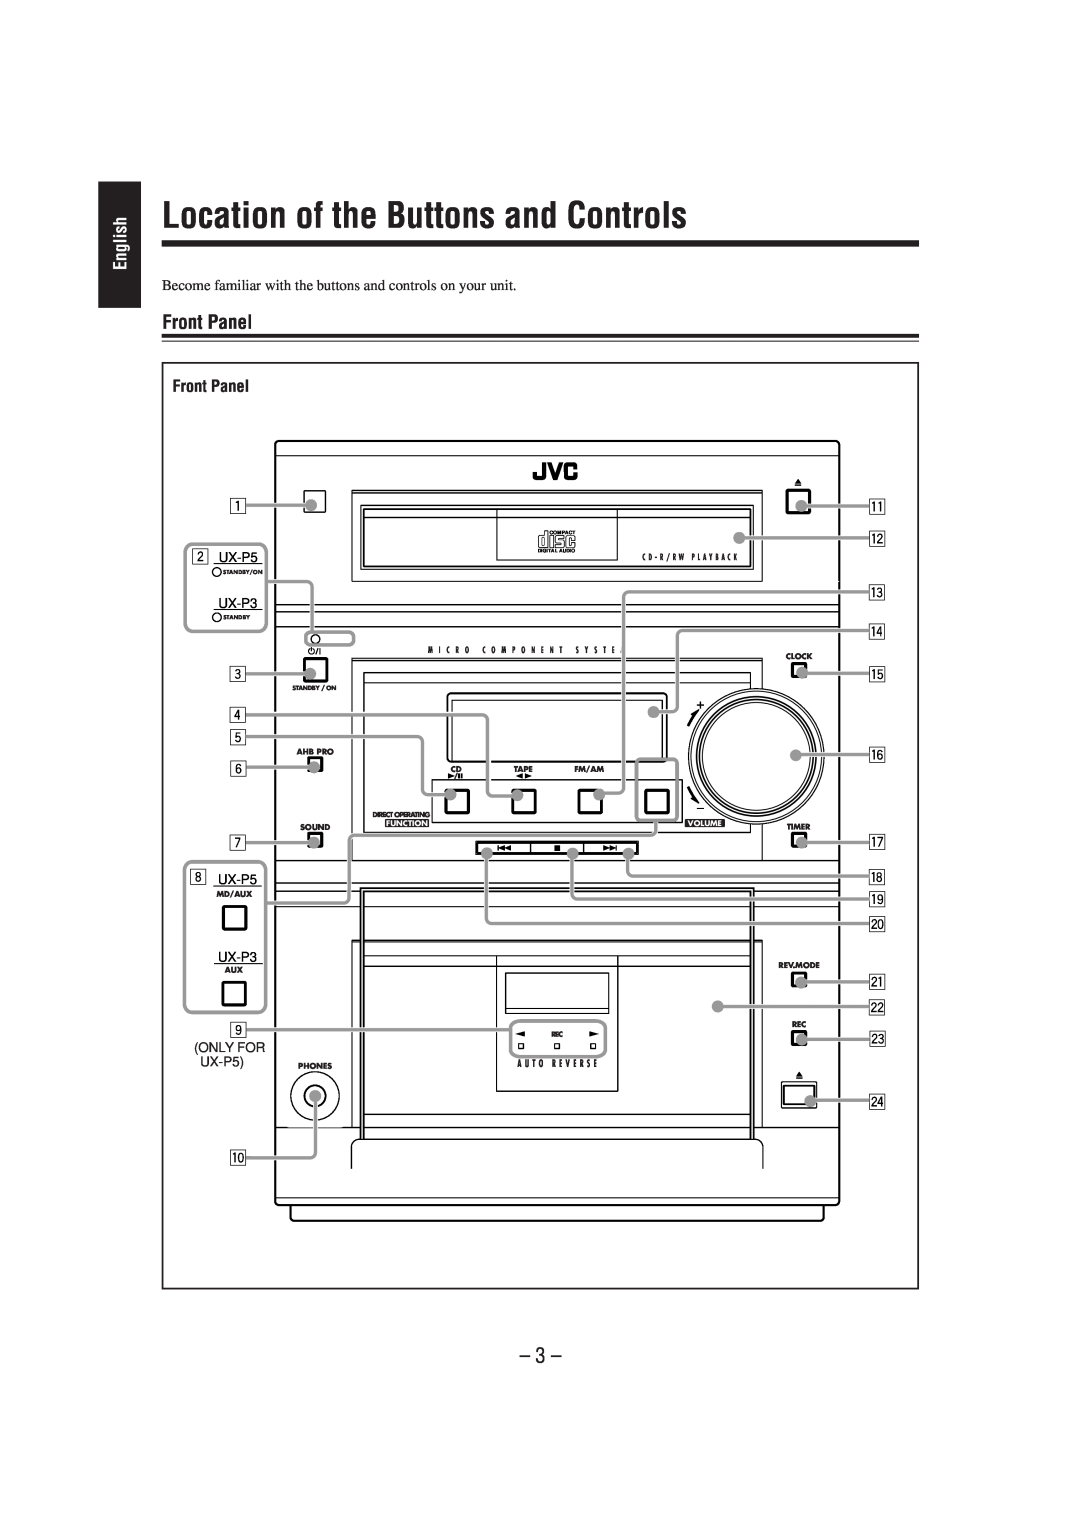 JVC UX-P5/UX-P3 manual Location of the Buttons and Controls, Front Panel, English 